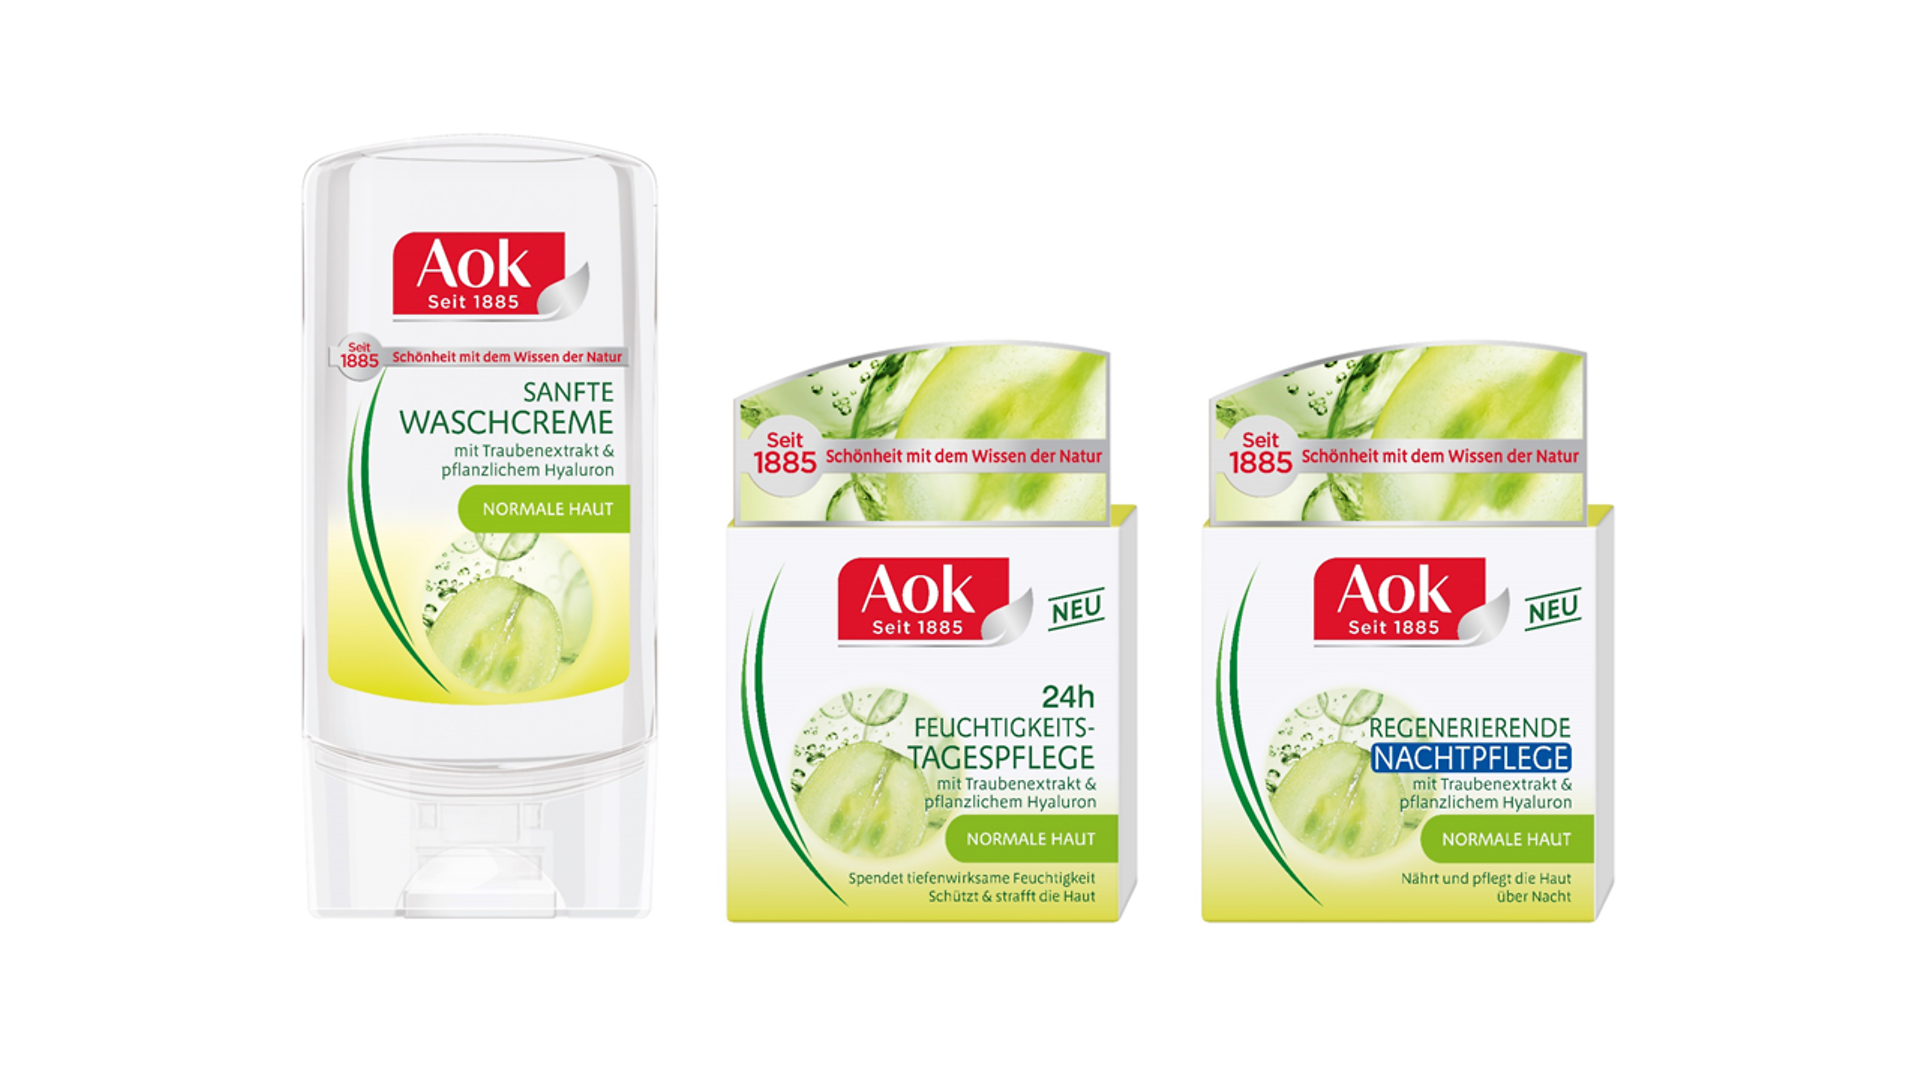 Since 1885 the Aok brand stands for natural beauty